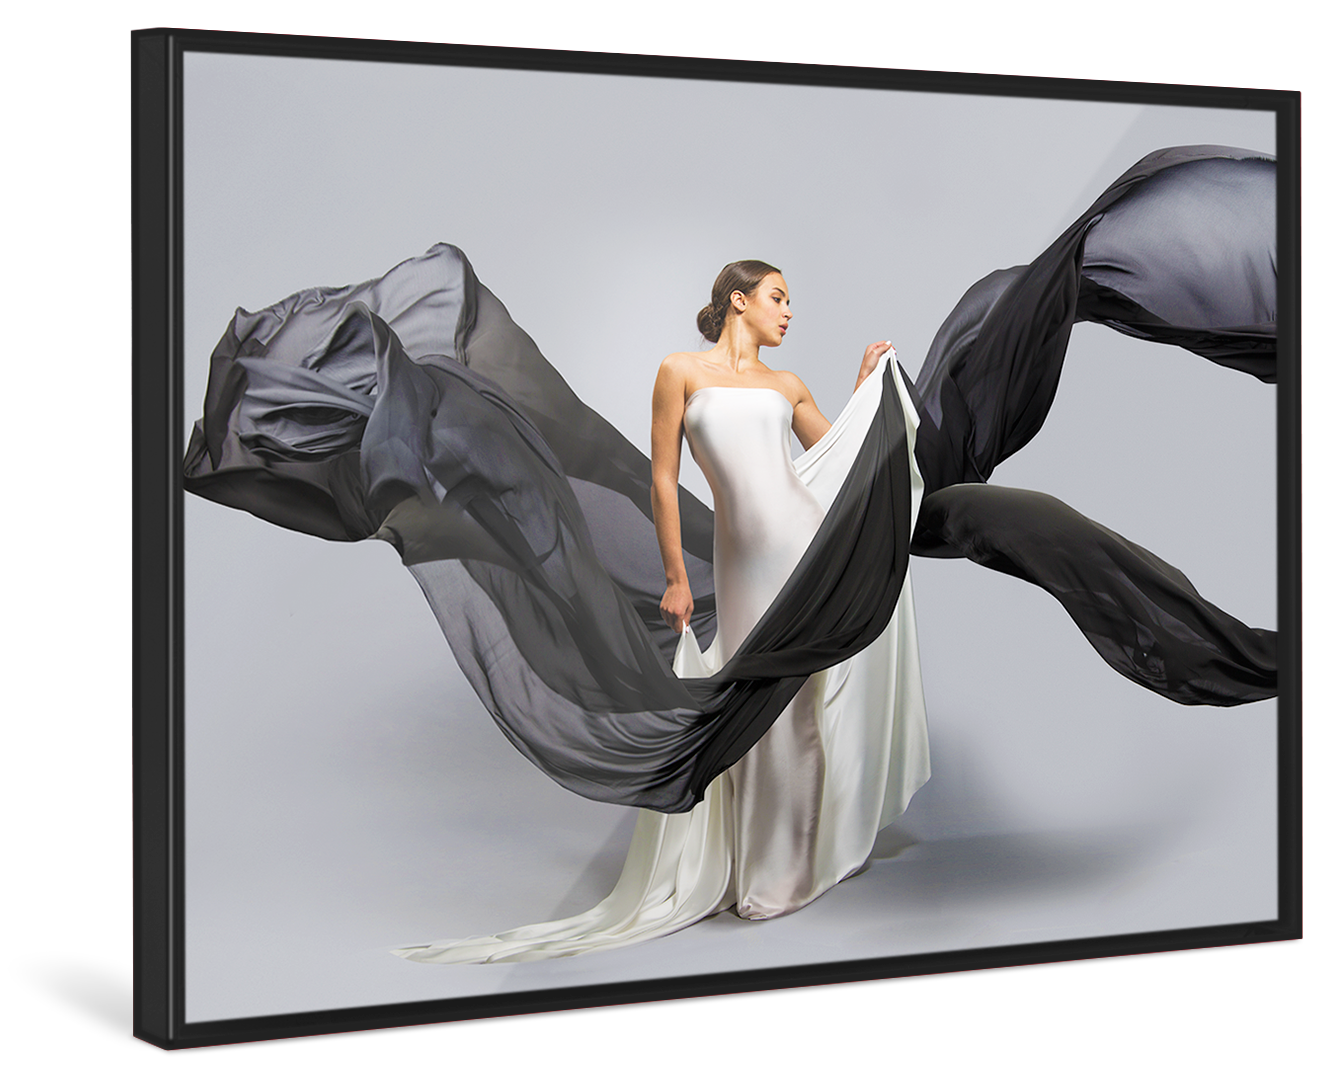 A woman in a white wedding dress holds black linen flying through the picture in a black Pop Art Frame.